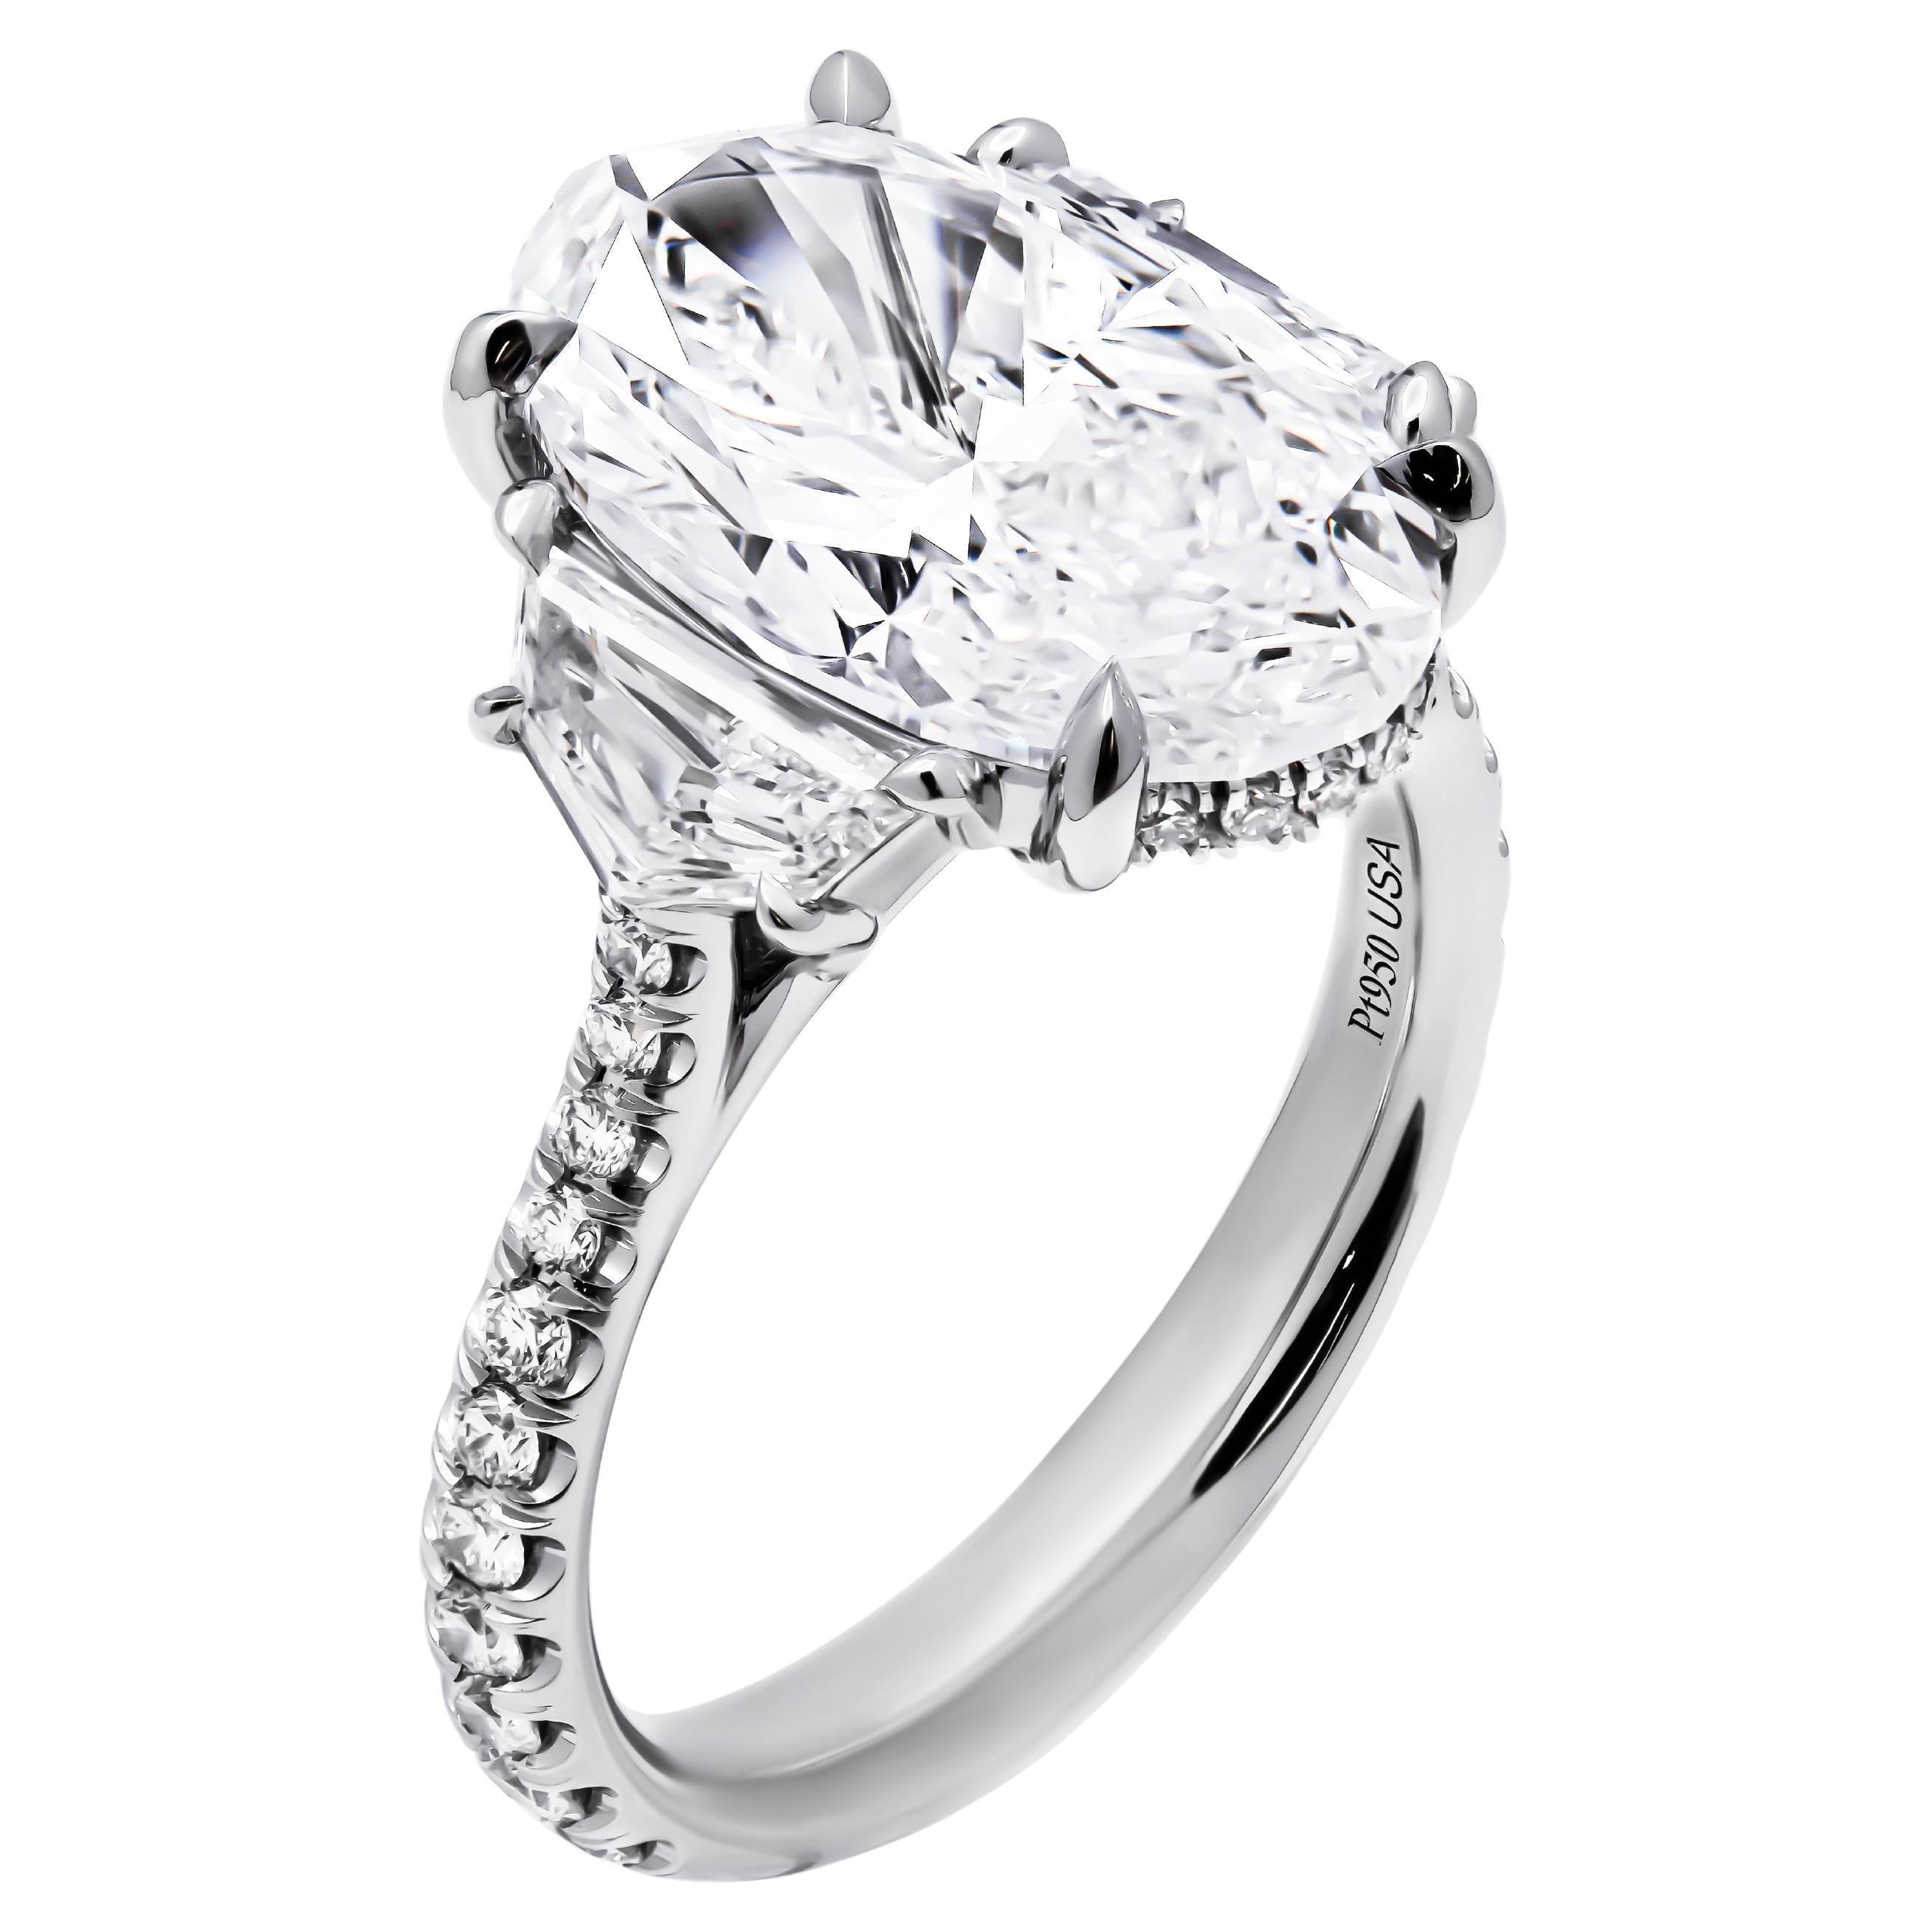 GIA Certified 3 Stone Ring with 5.03ct Oval Diamond